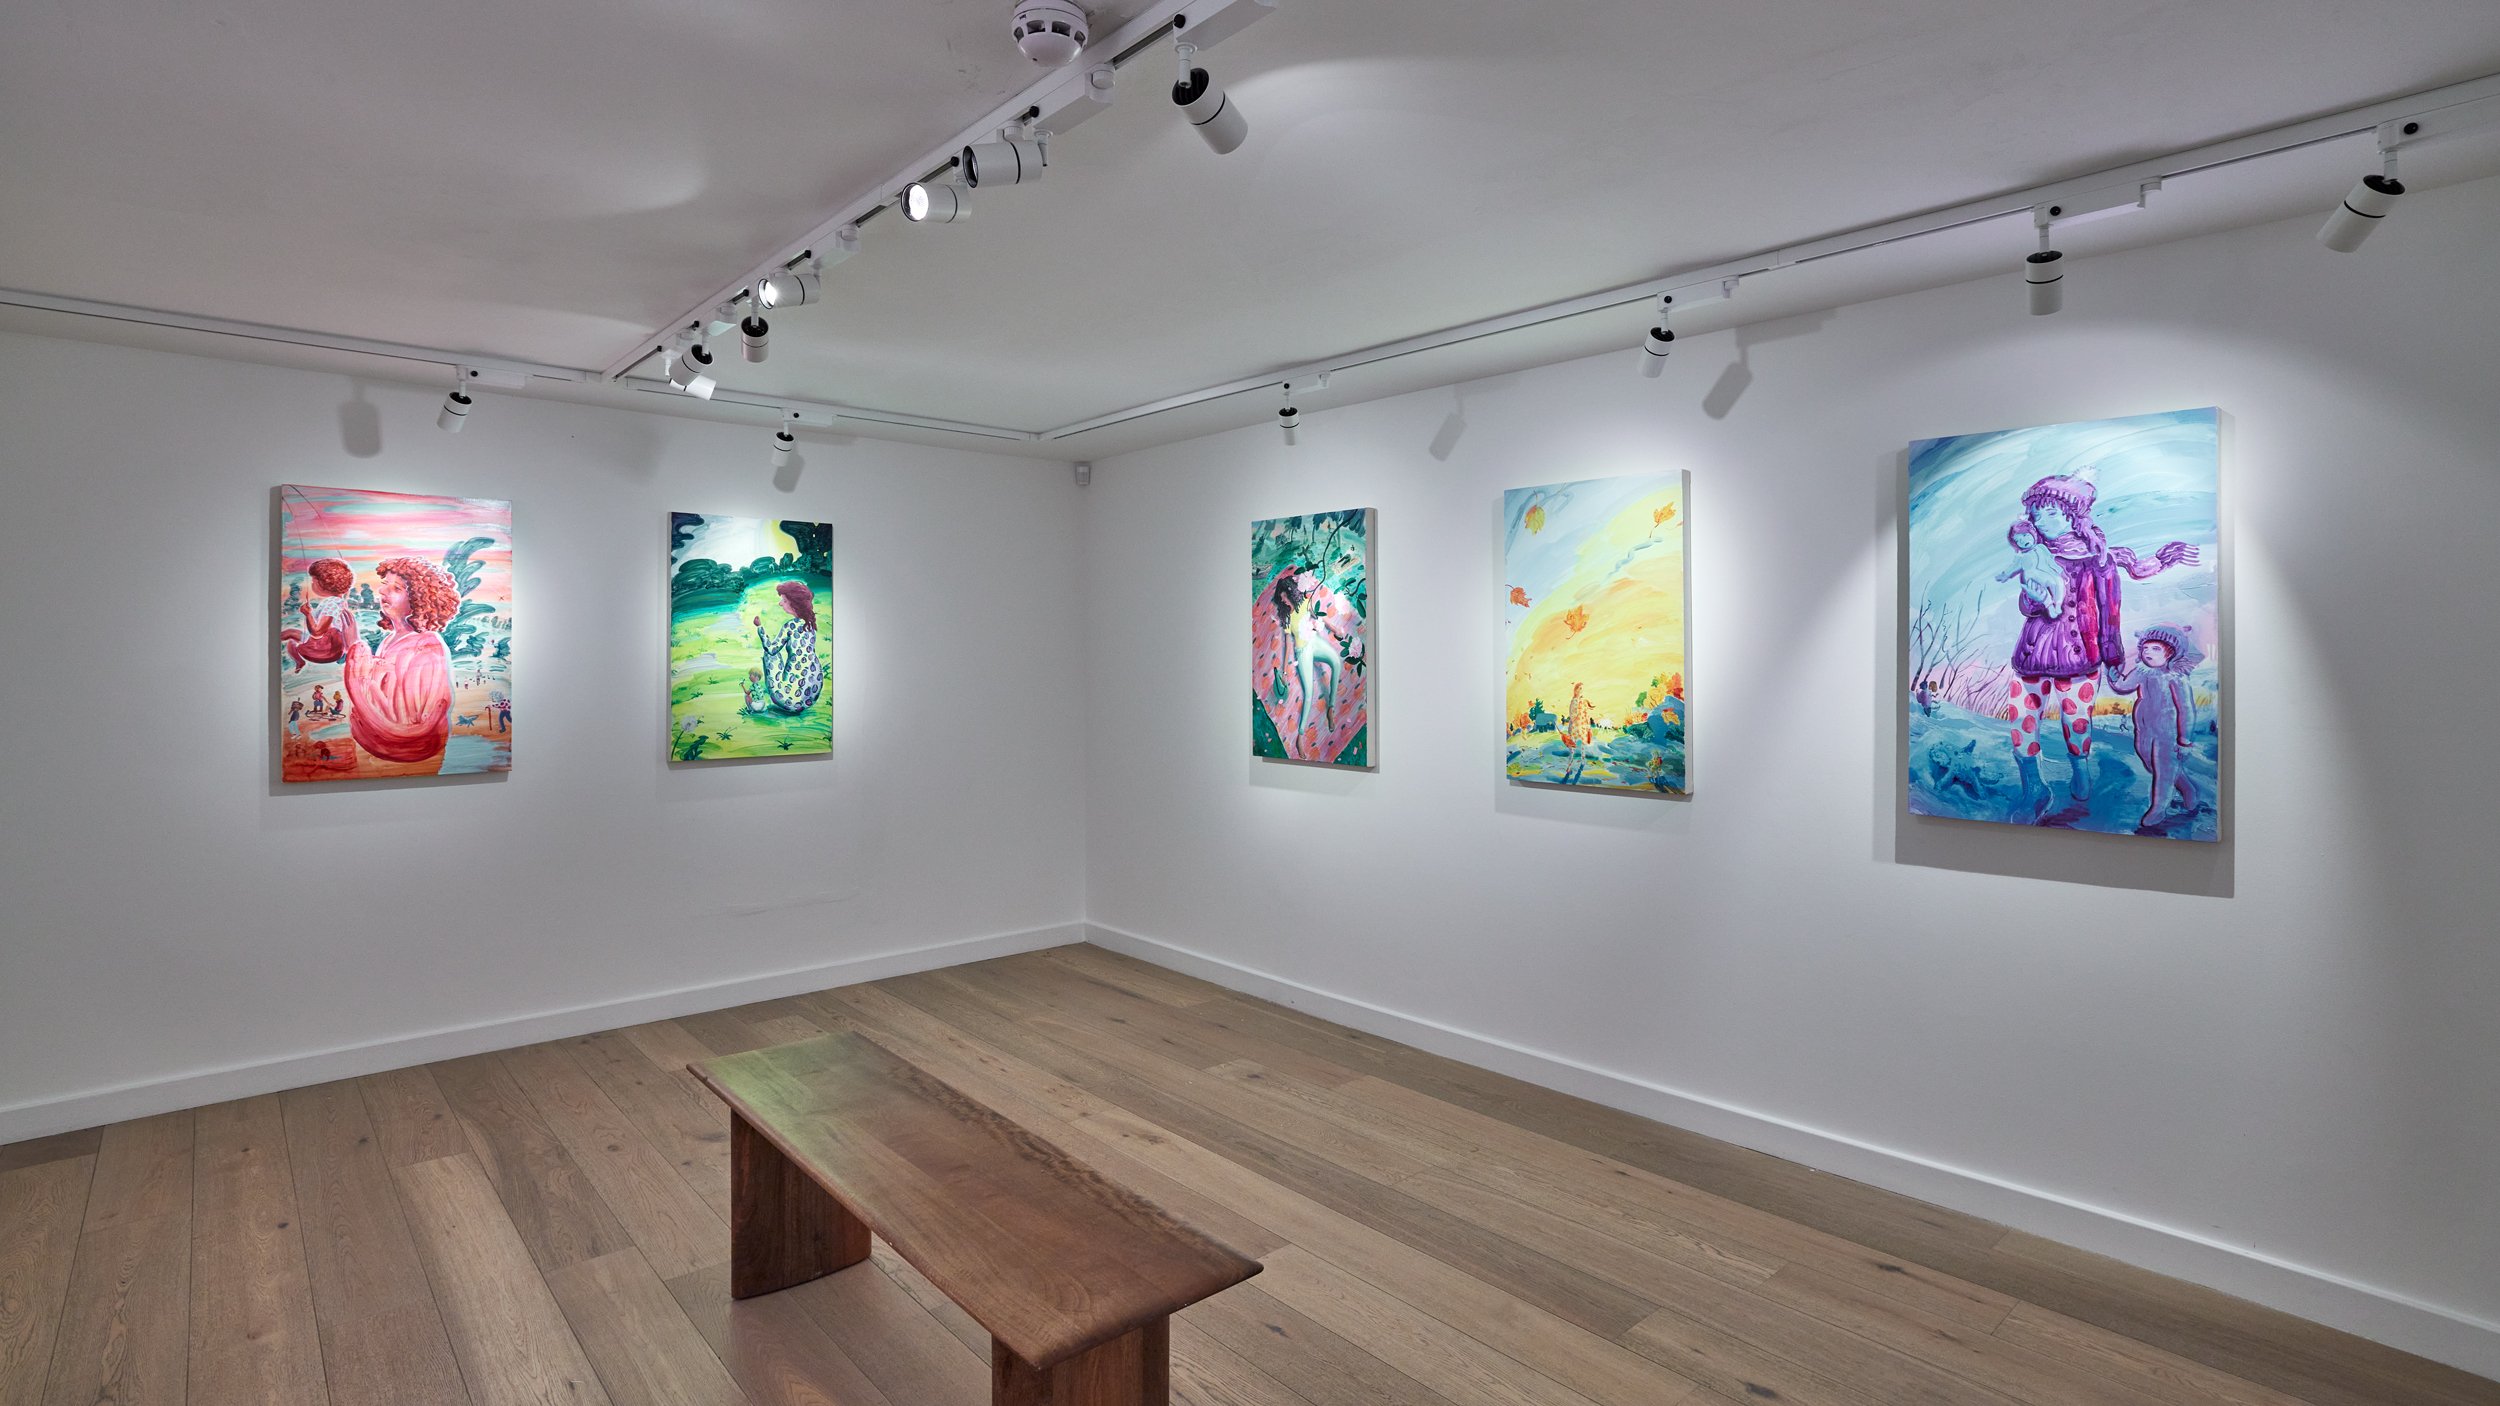 Install image courtesy Taymour Grahne, Notting Hill, London